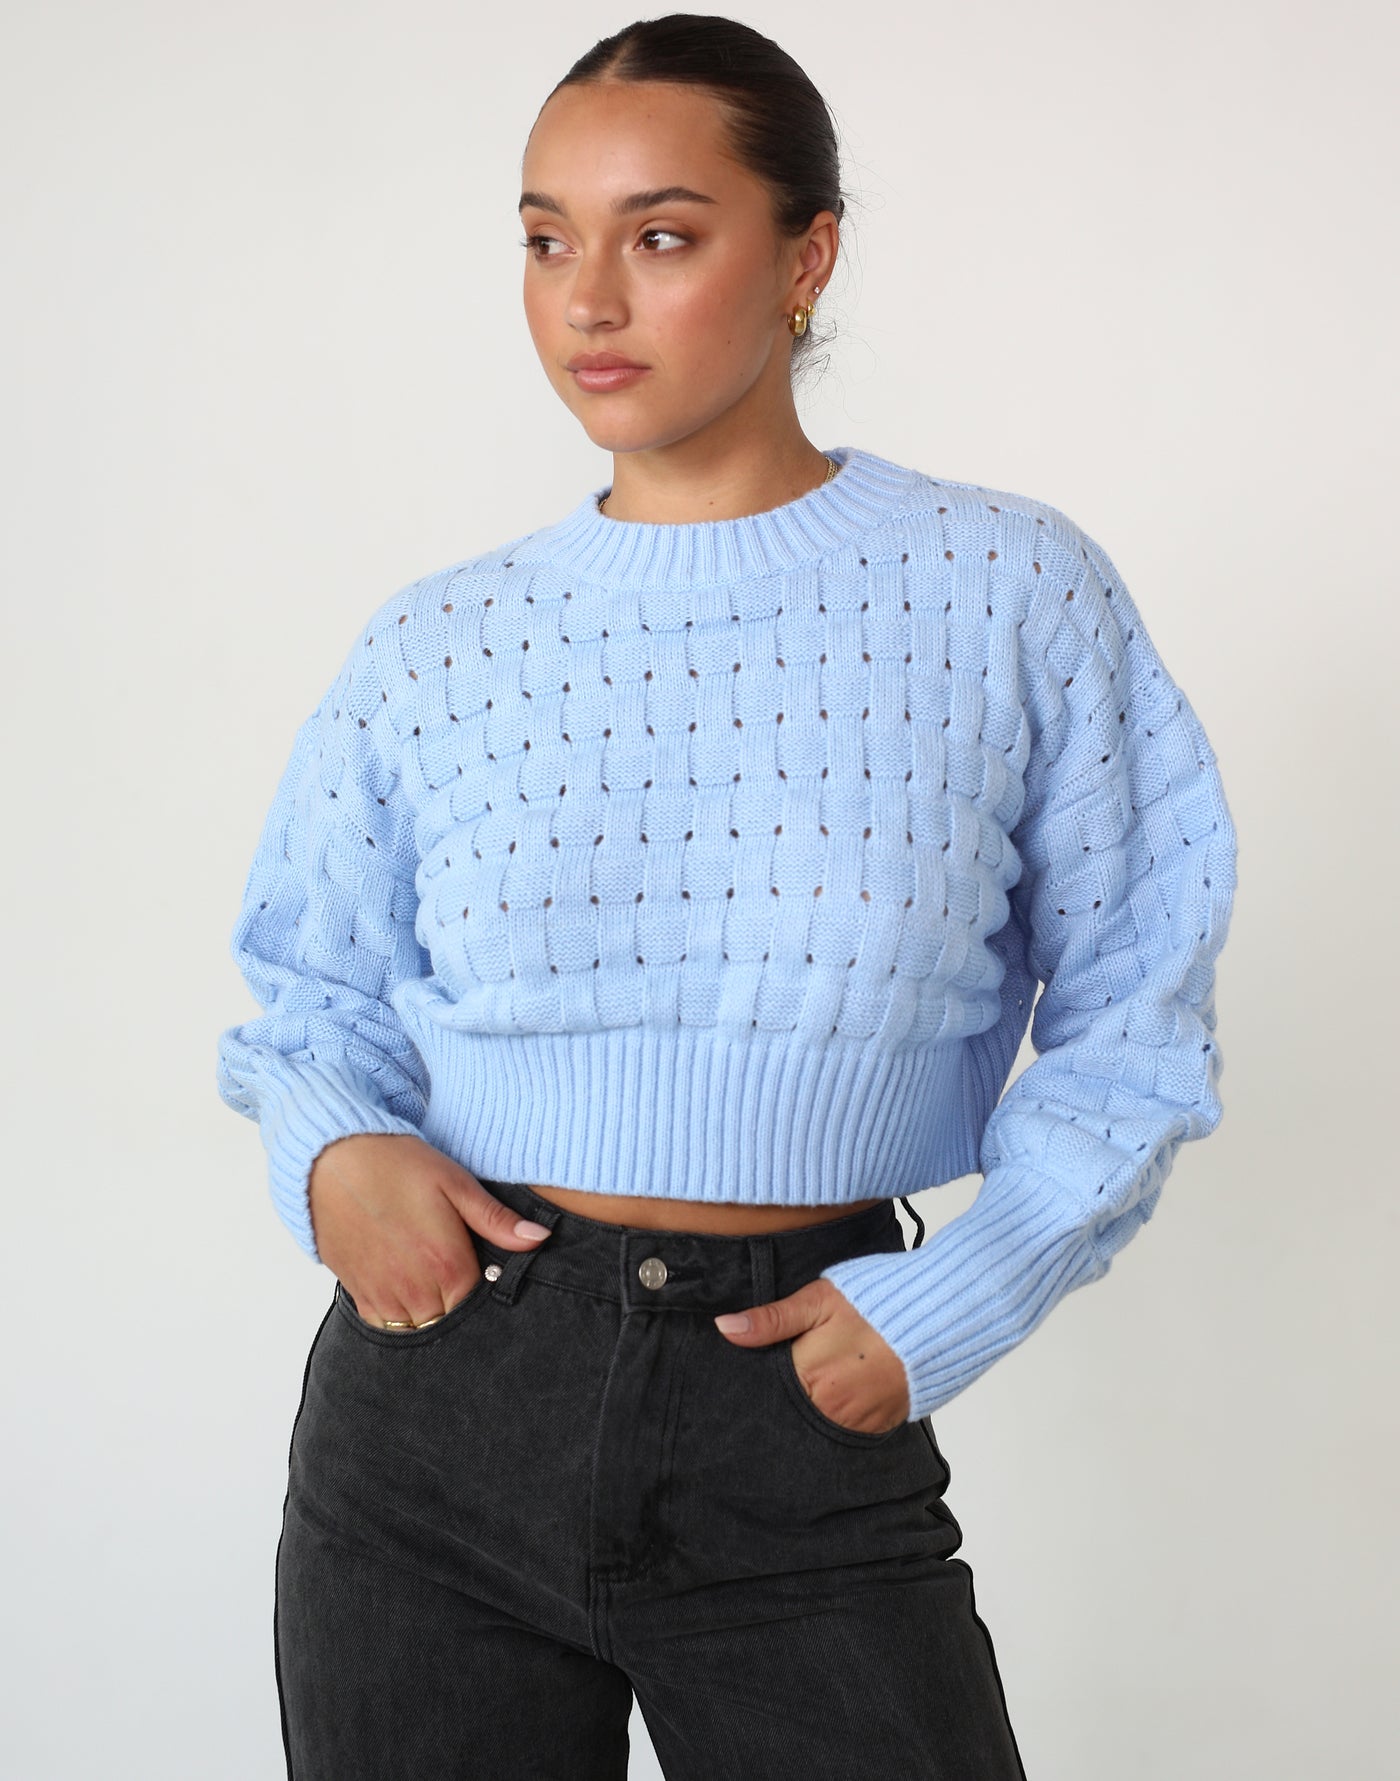 Rivera Jumper (Blue) - Cropped Weave Knit Detail Jumper - Women's Tops - Charcoal Clothing